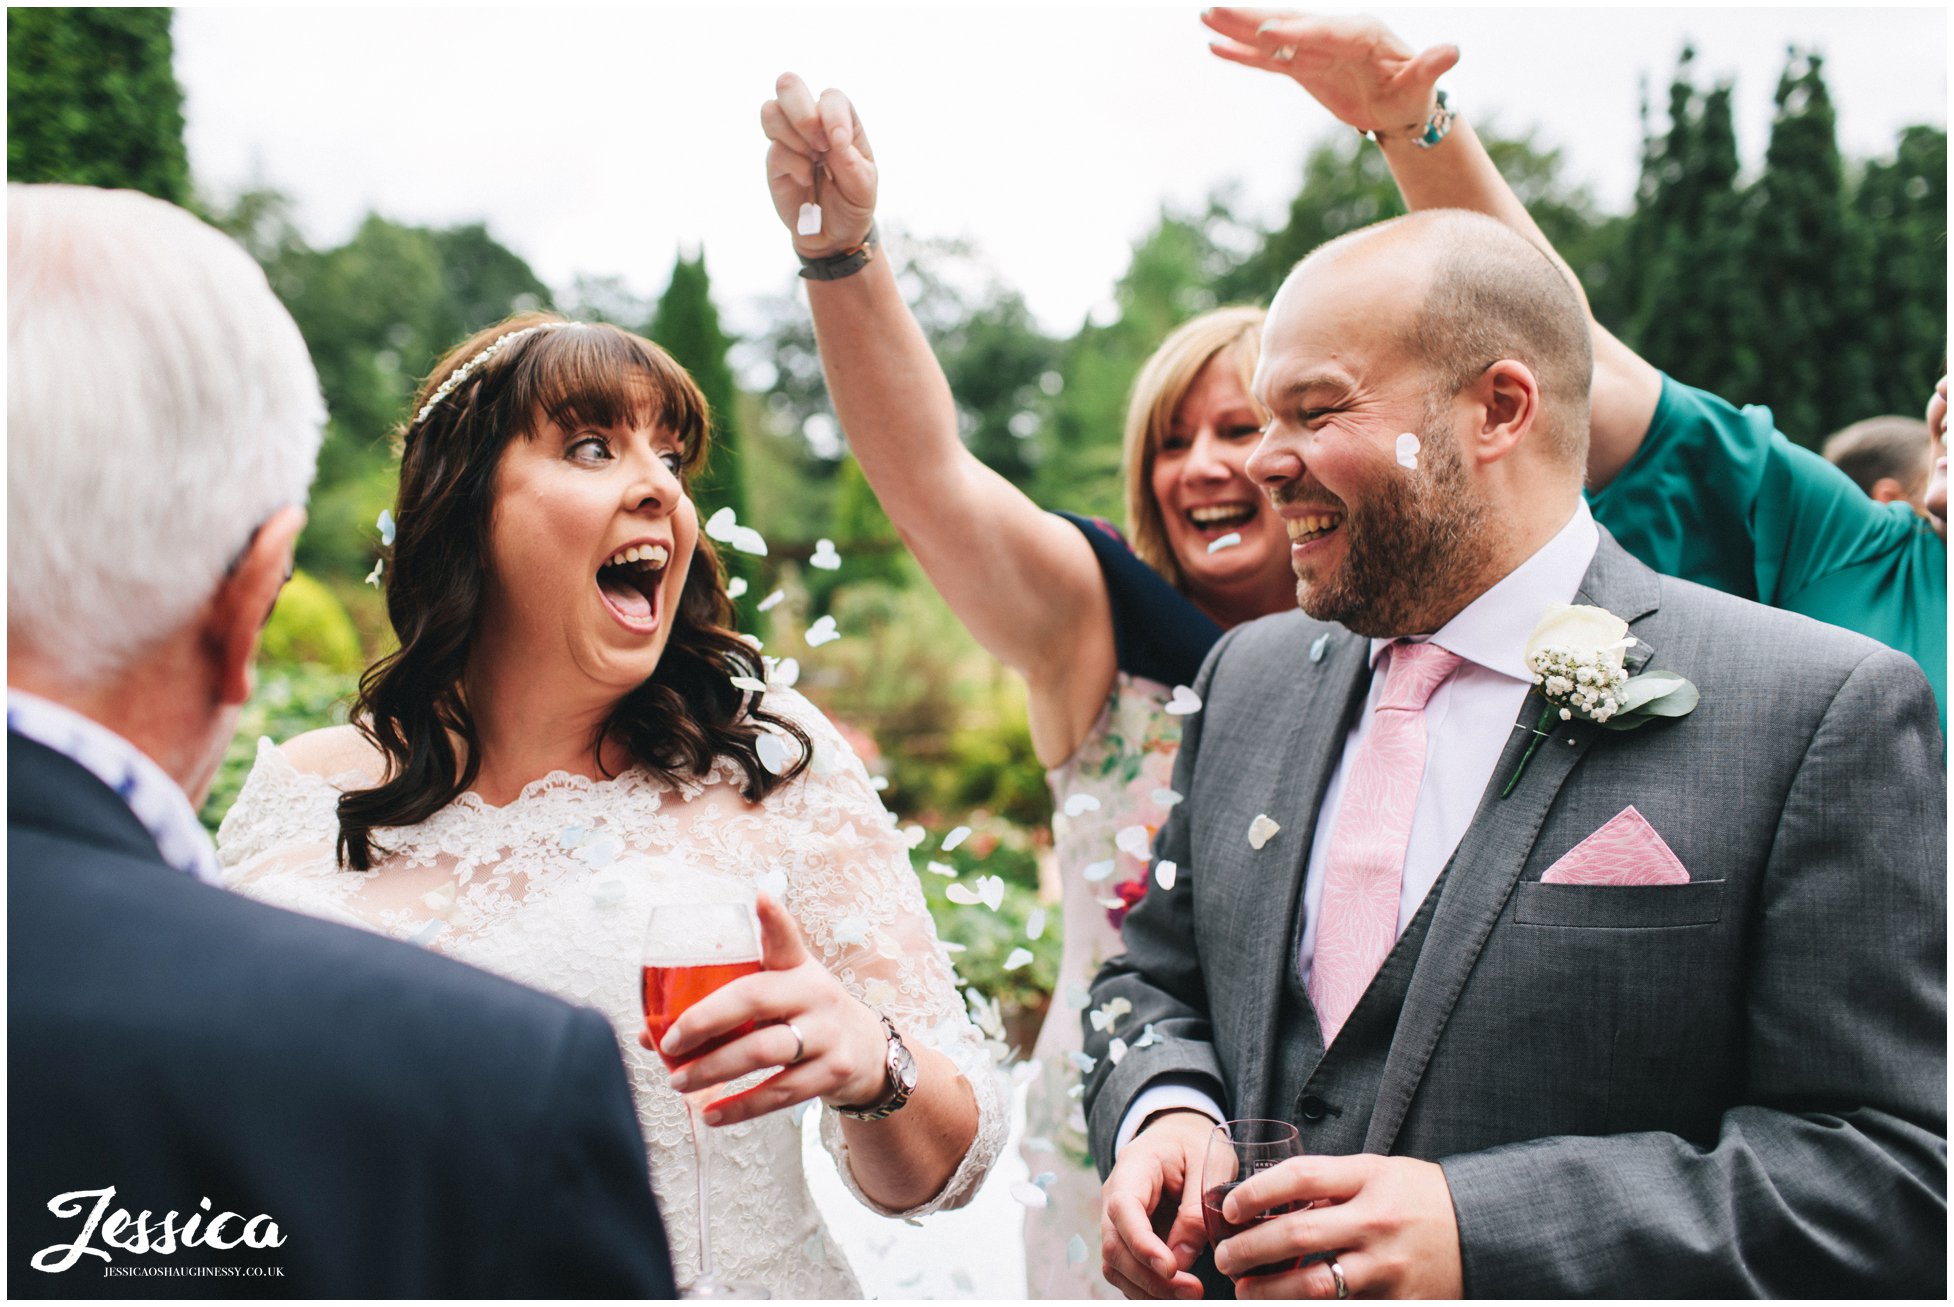 guests surprise the couple by showering them in confetti